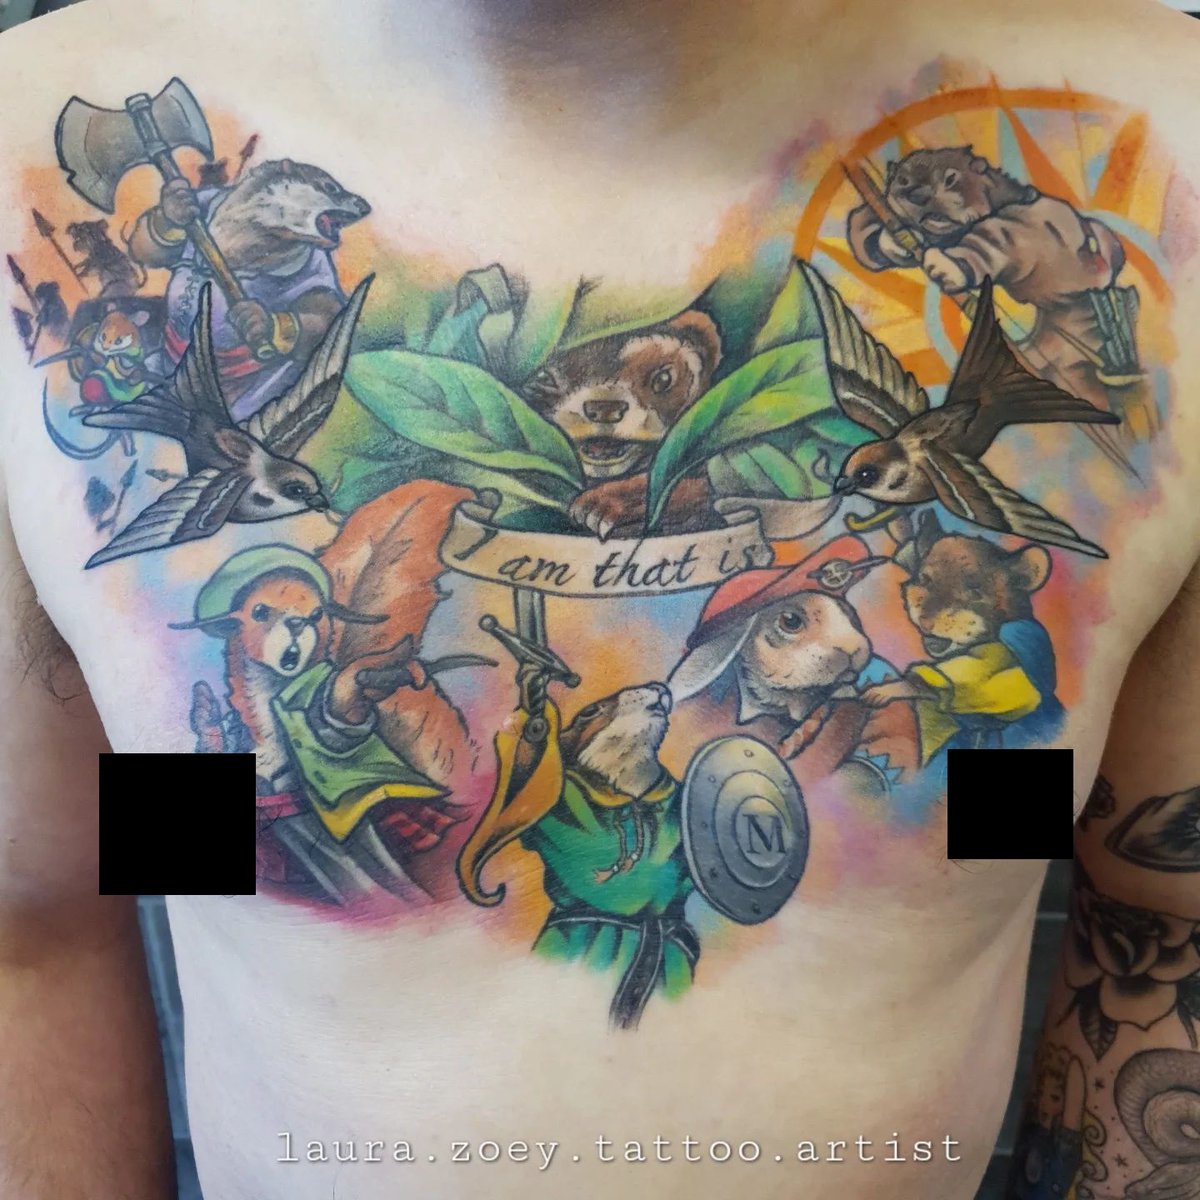 Adam's Redwall chest piece tattoo, inspired by the cover artwork of Troy Howell! We spot Redwall, The Long Patrol, Martin the Warrior, Outcast of Redwall, Rakkety Tam, and Pearls of Lutra! Ink by Laura Zoey, Penkridge Tattoo Studio, Staffordshire, UK. redwall.fandom.com/wiki/Redwall_T…